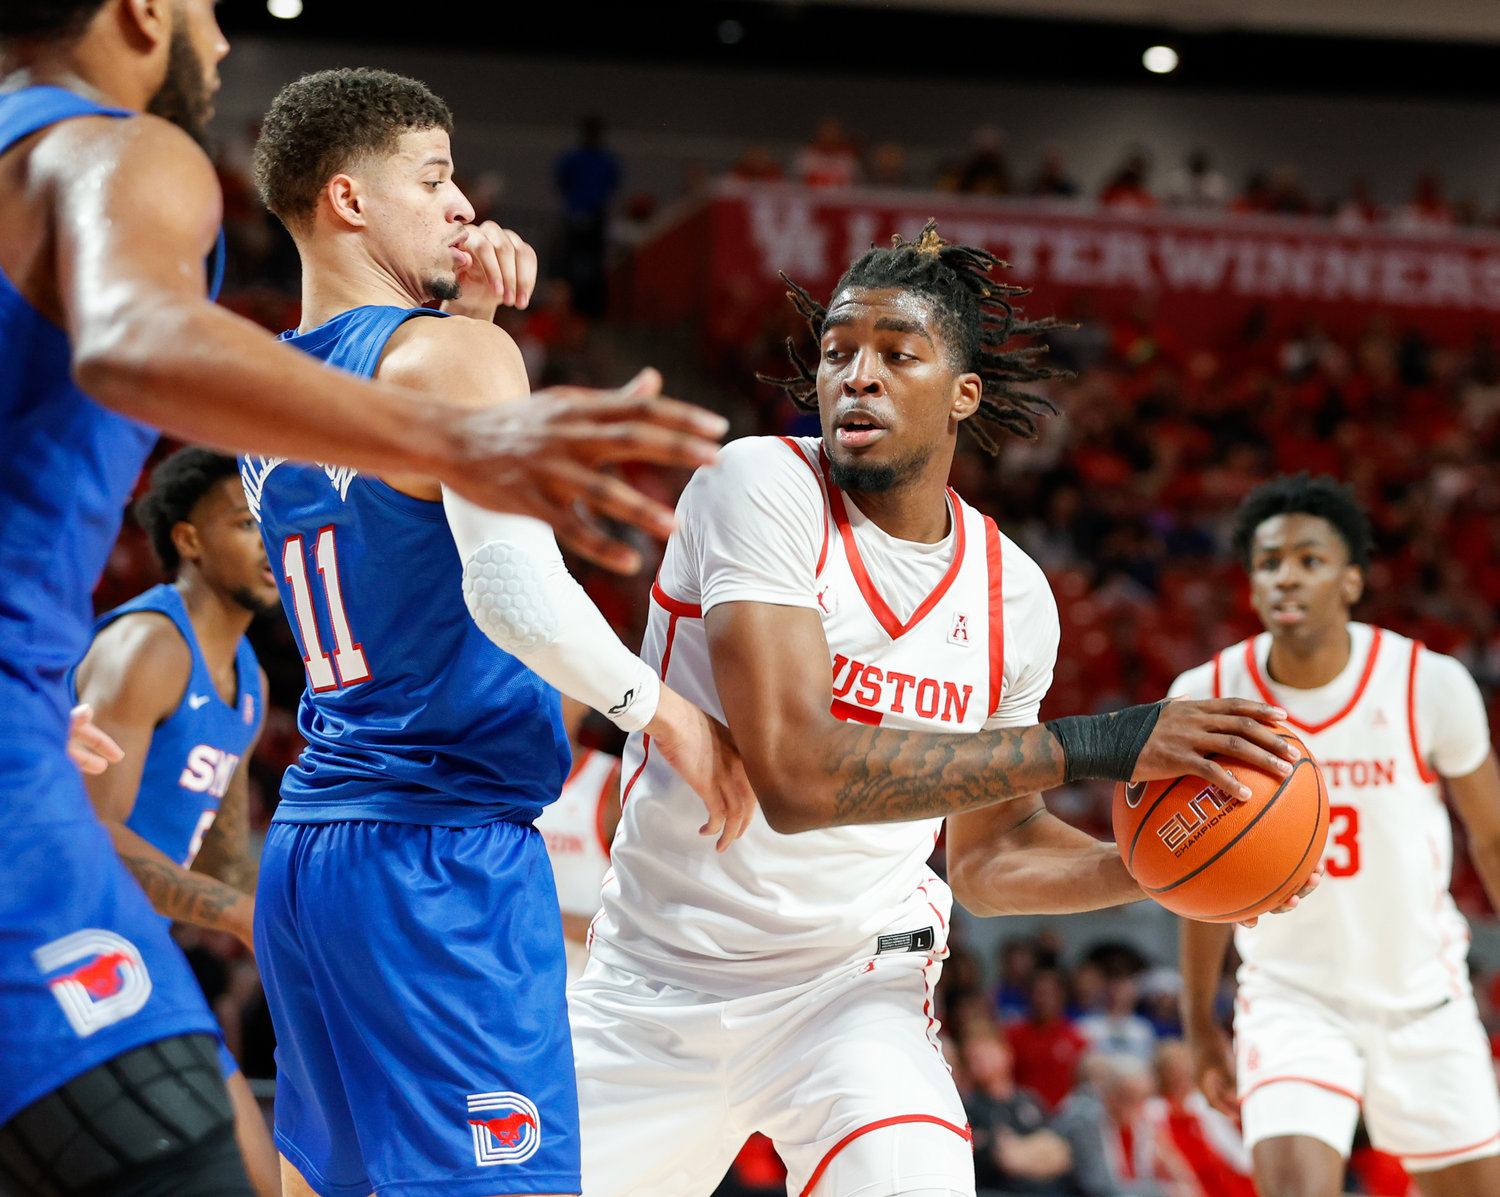 Houston forward Ja'Vier Francis (5) looks to pass during an NCAA men’s basketball game between the Houston Cougars and the Southern Methodist Mustangs on Jan. 5, 2023 in Houston. Houston won, 87-53,